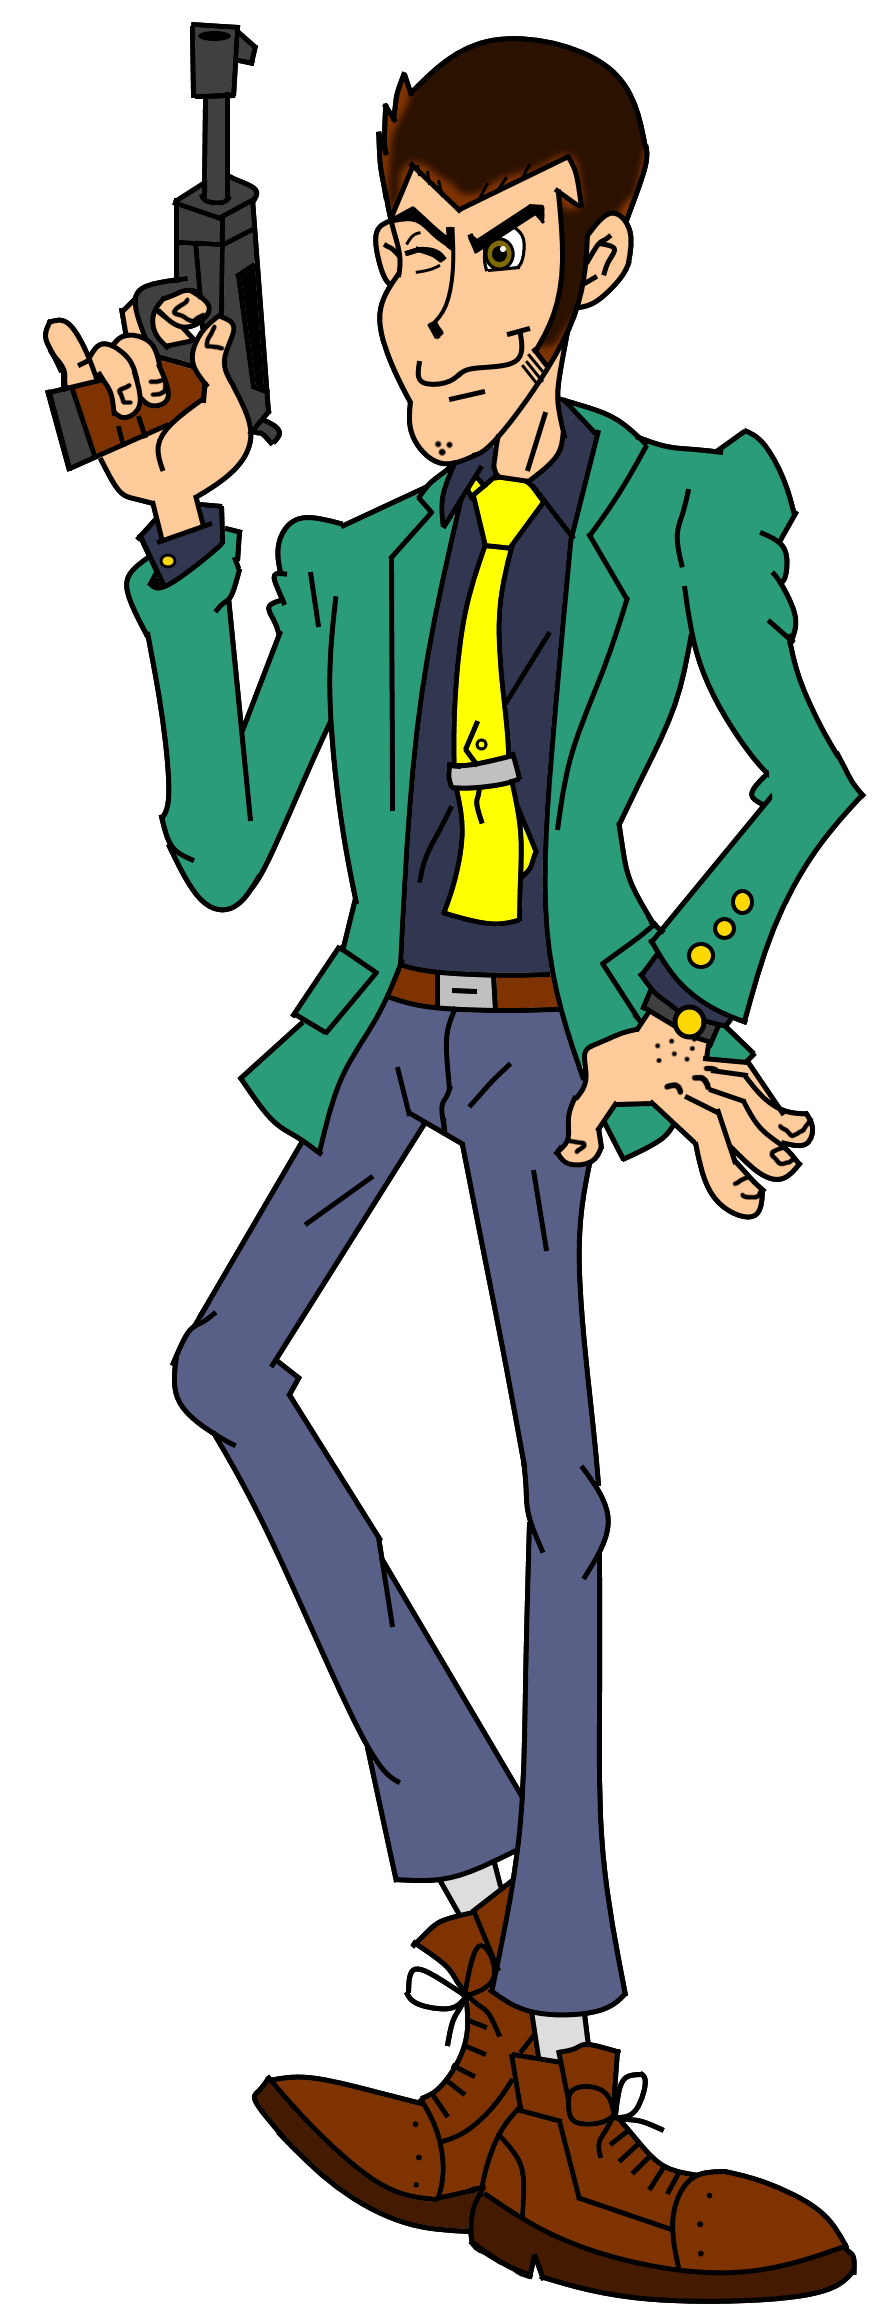 Lupin the Third Anime: Green Jacket by FrostTheHobidon on DeviantArt